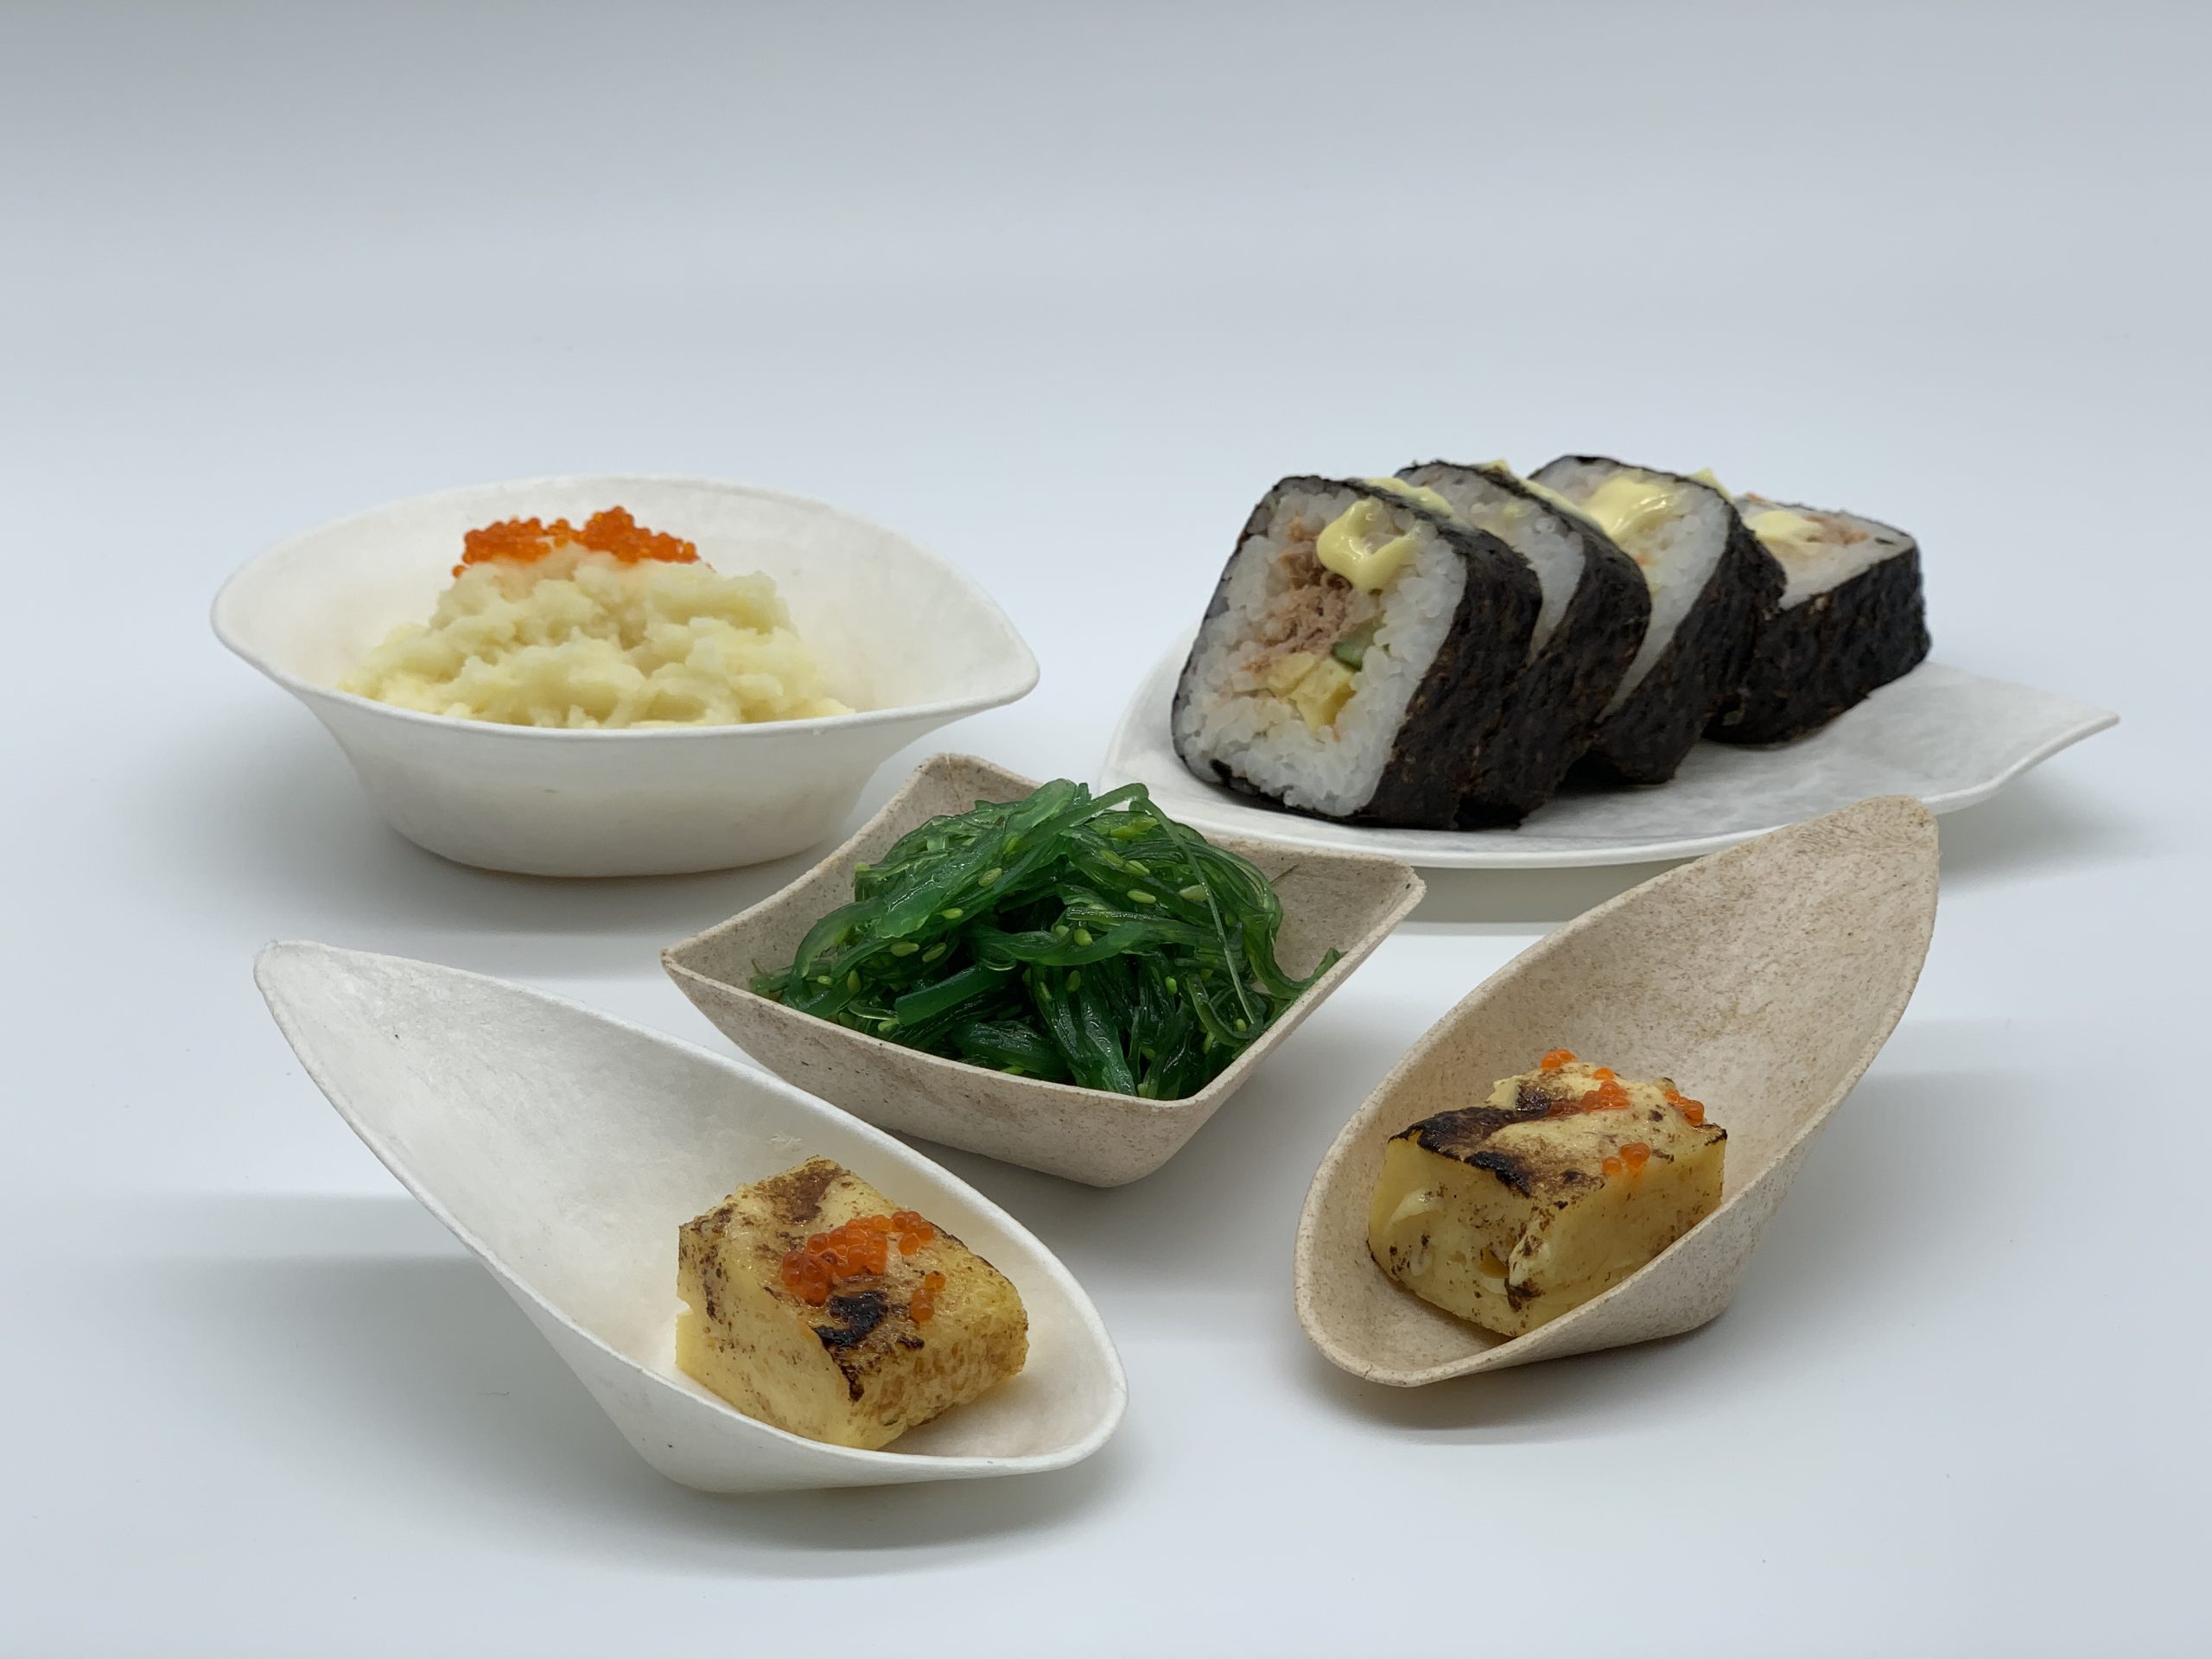 Creative unique shaped biodegradable eco friendly dishes for sushi finger food and sauce dipping